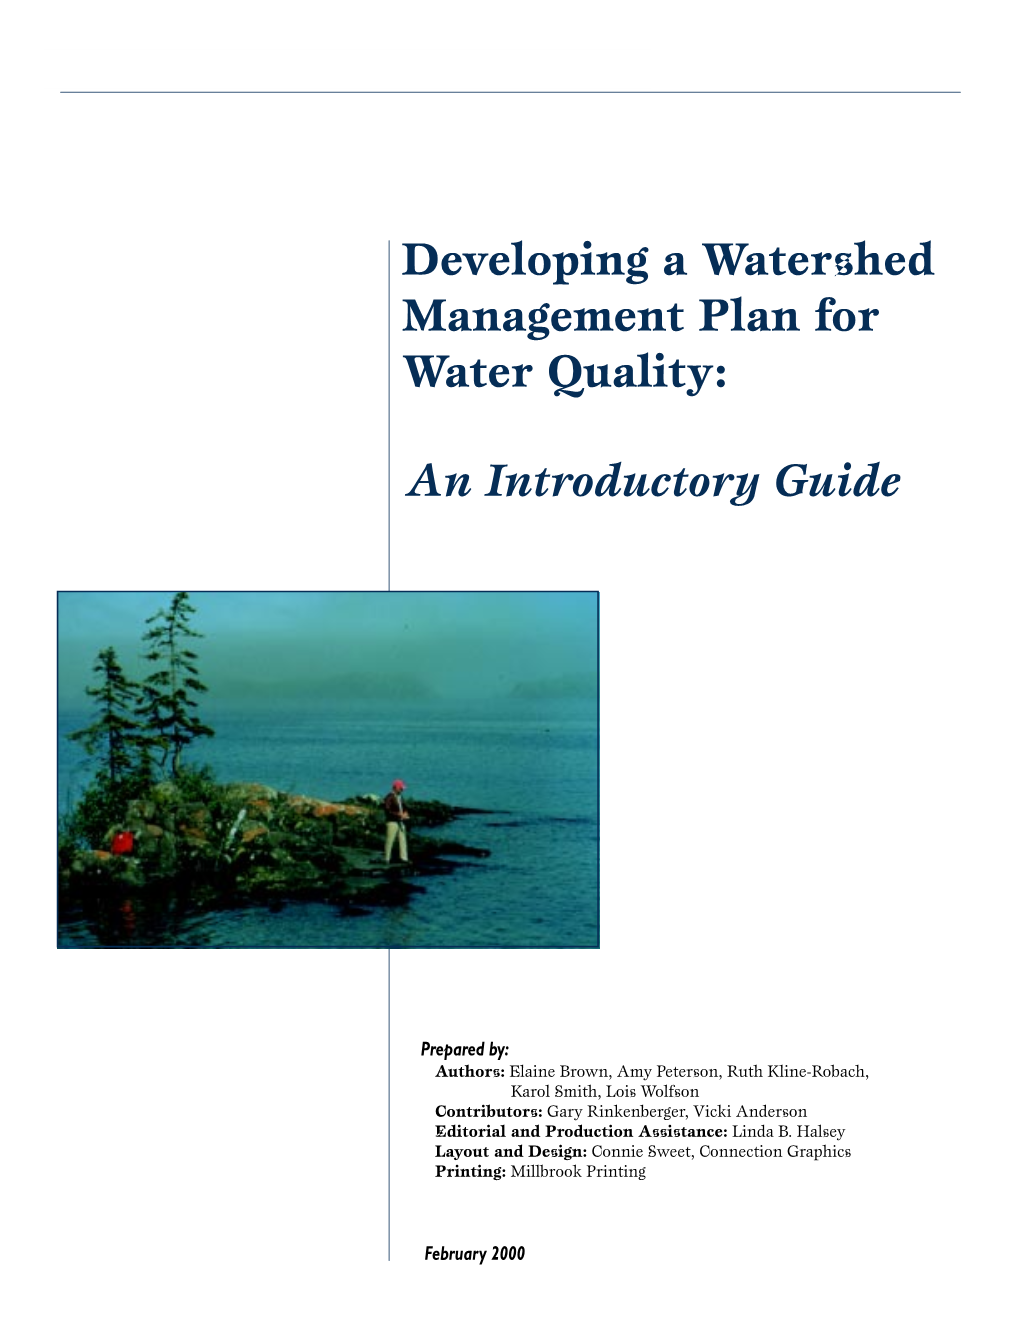 Developing a Watershed Management Plan for Water Quality: an Introductory Guide